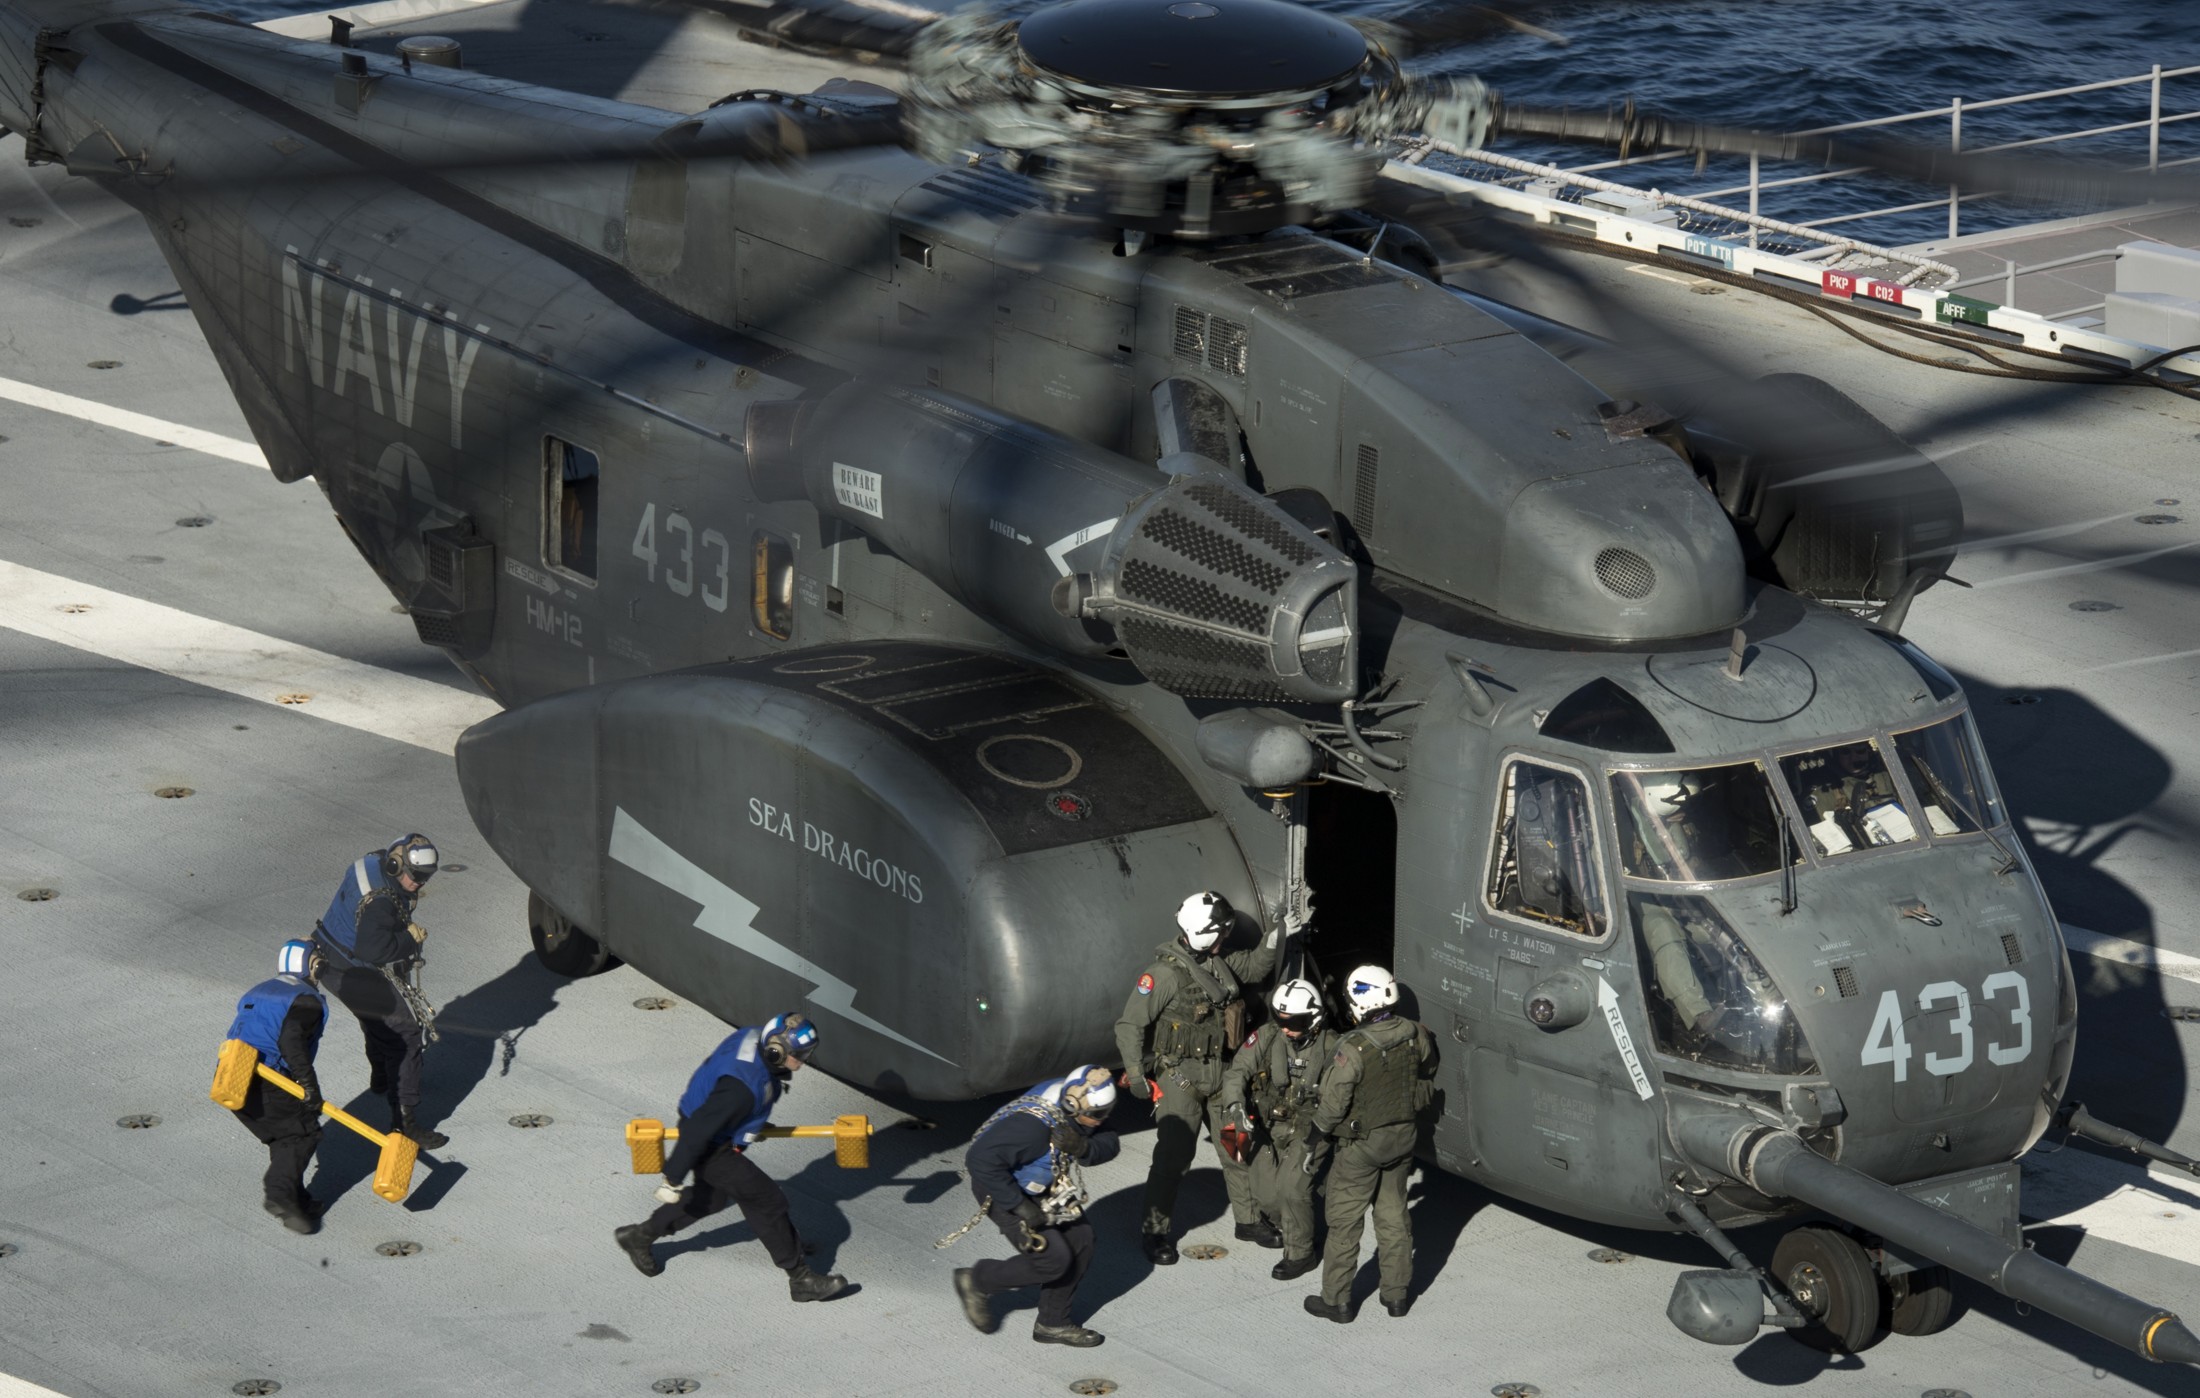 hm-12 sea dragons helicopter mine countermeasures squadron navy mh-53d sea dragon 24